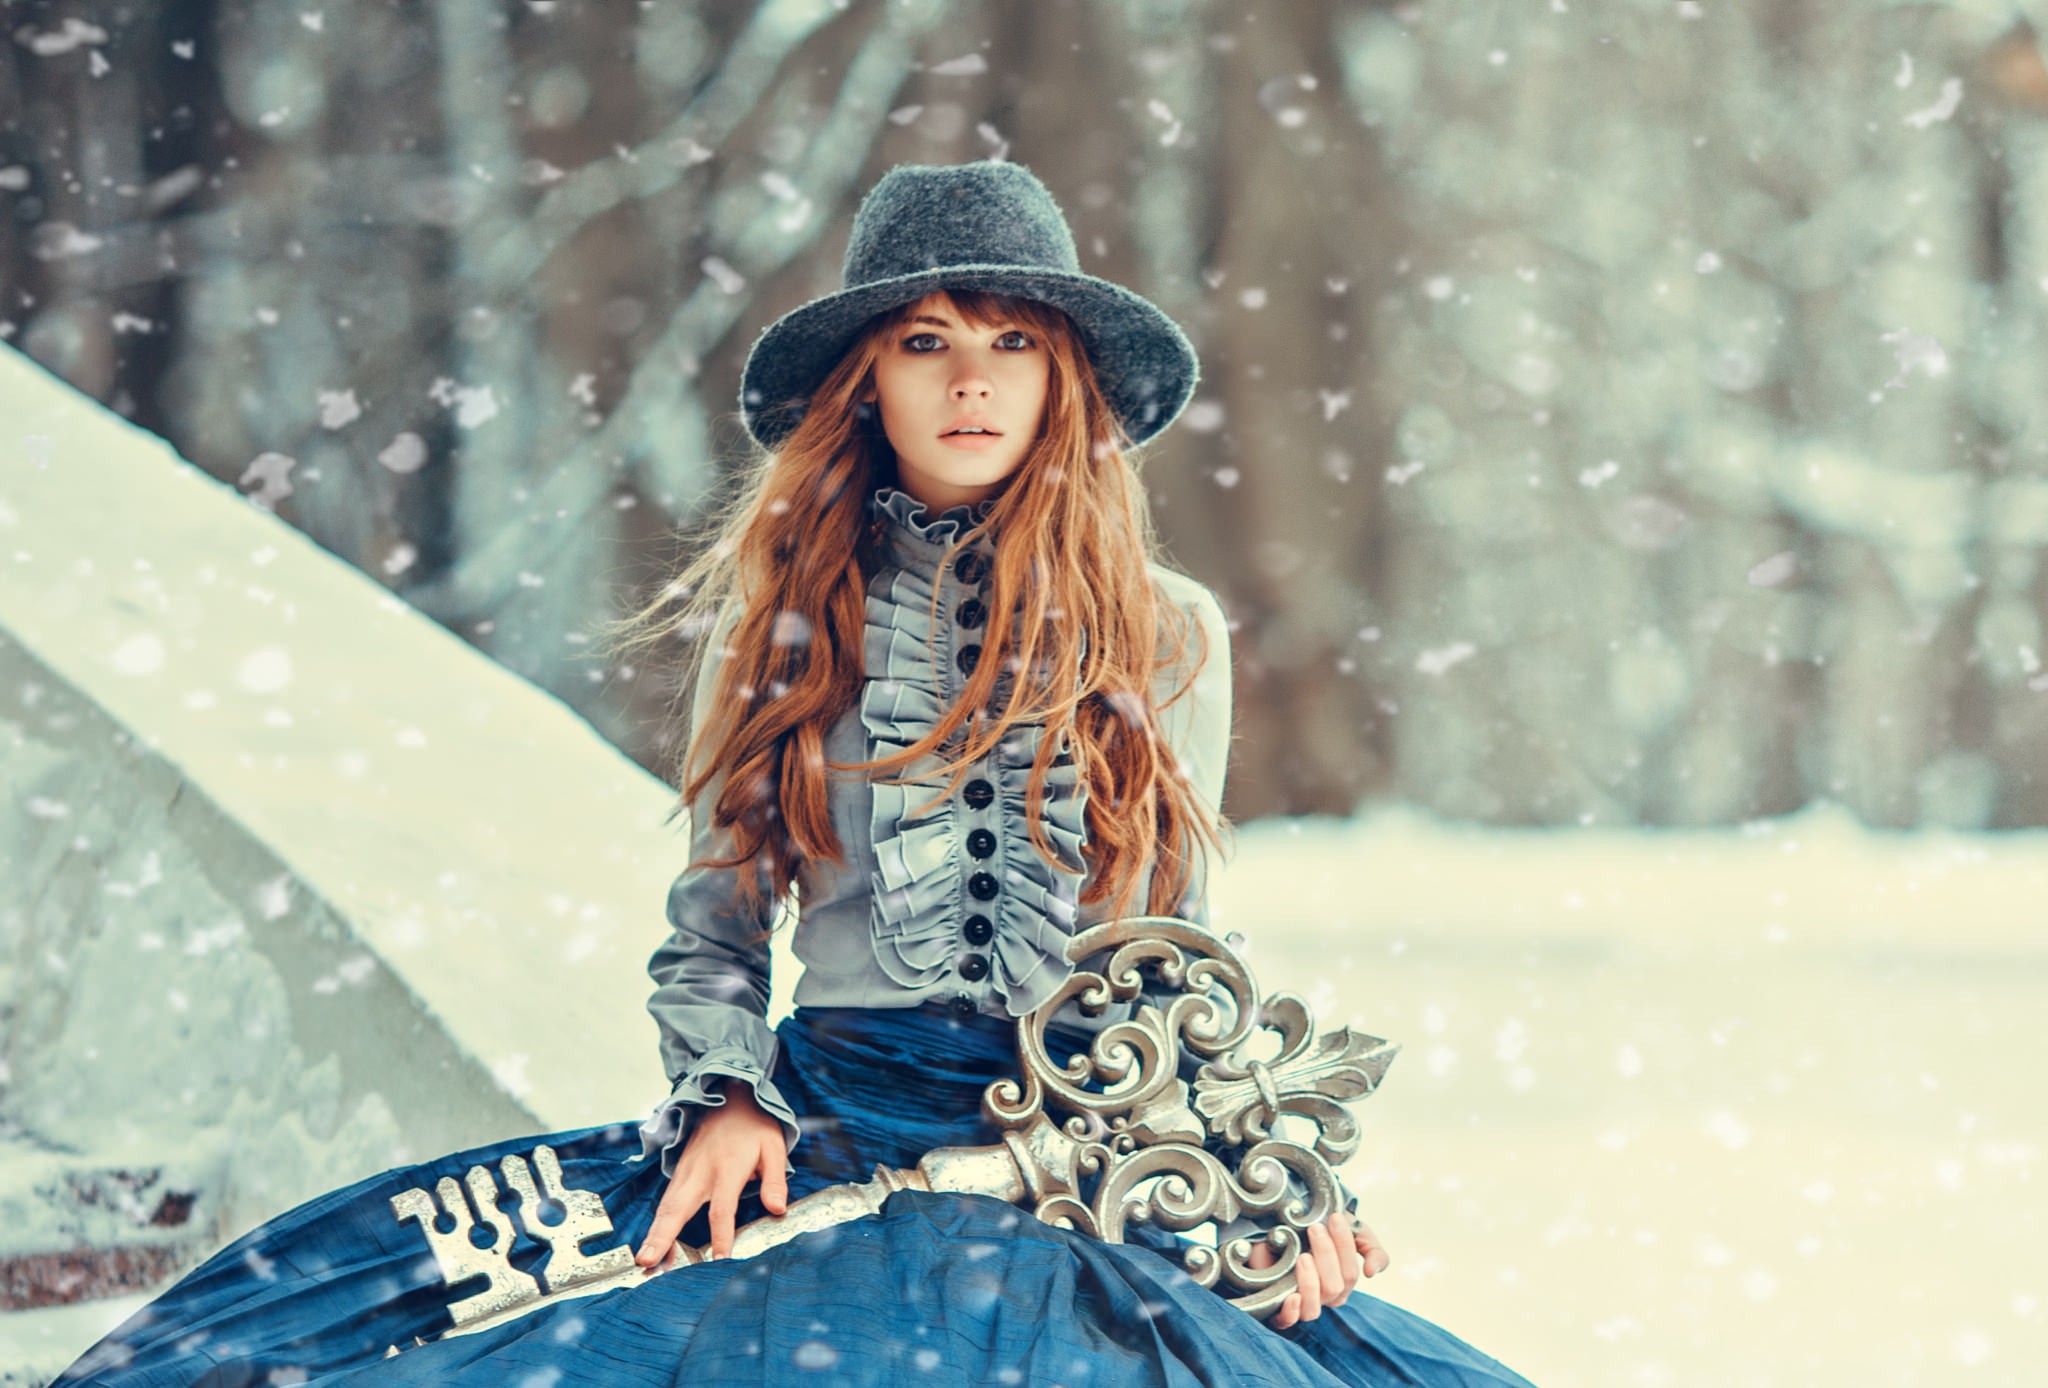 People 2048x1388 women Anastasia Scheglova snow sitting hat frontal view Russian women fantasy girl women with hats snowflakes outdoors women outdoors Russian model cold winter looking at viewer